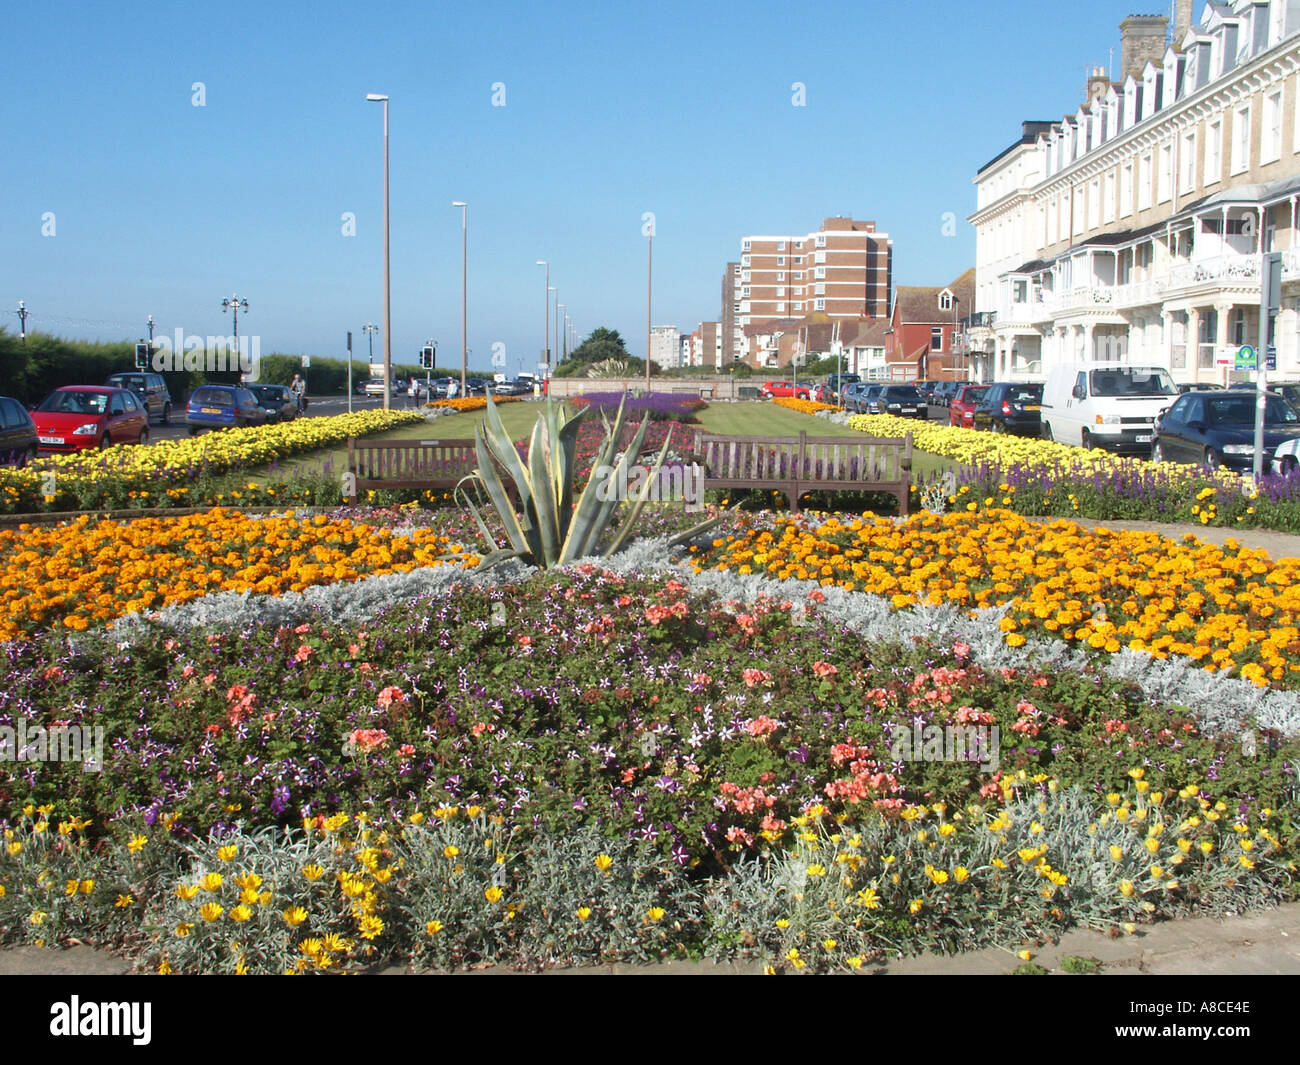 Worthing summer bedding plants in gardens fronting residential terraces close to promenade West Sussex England UK Stock Photo